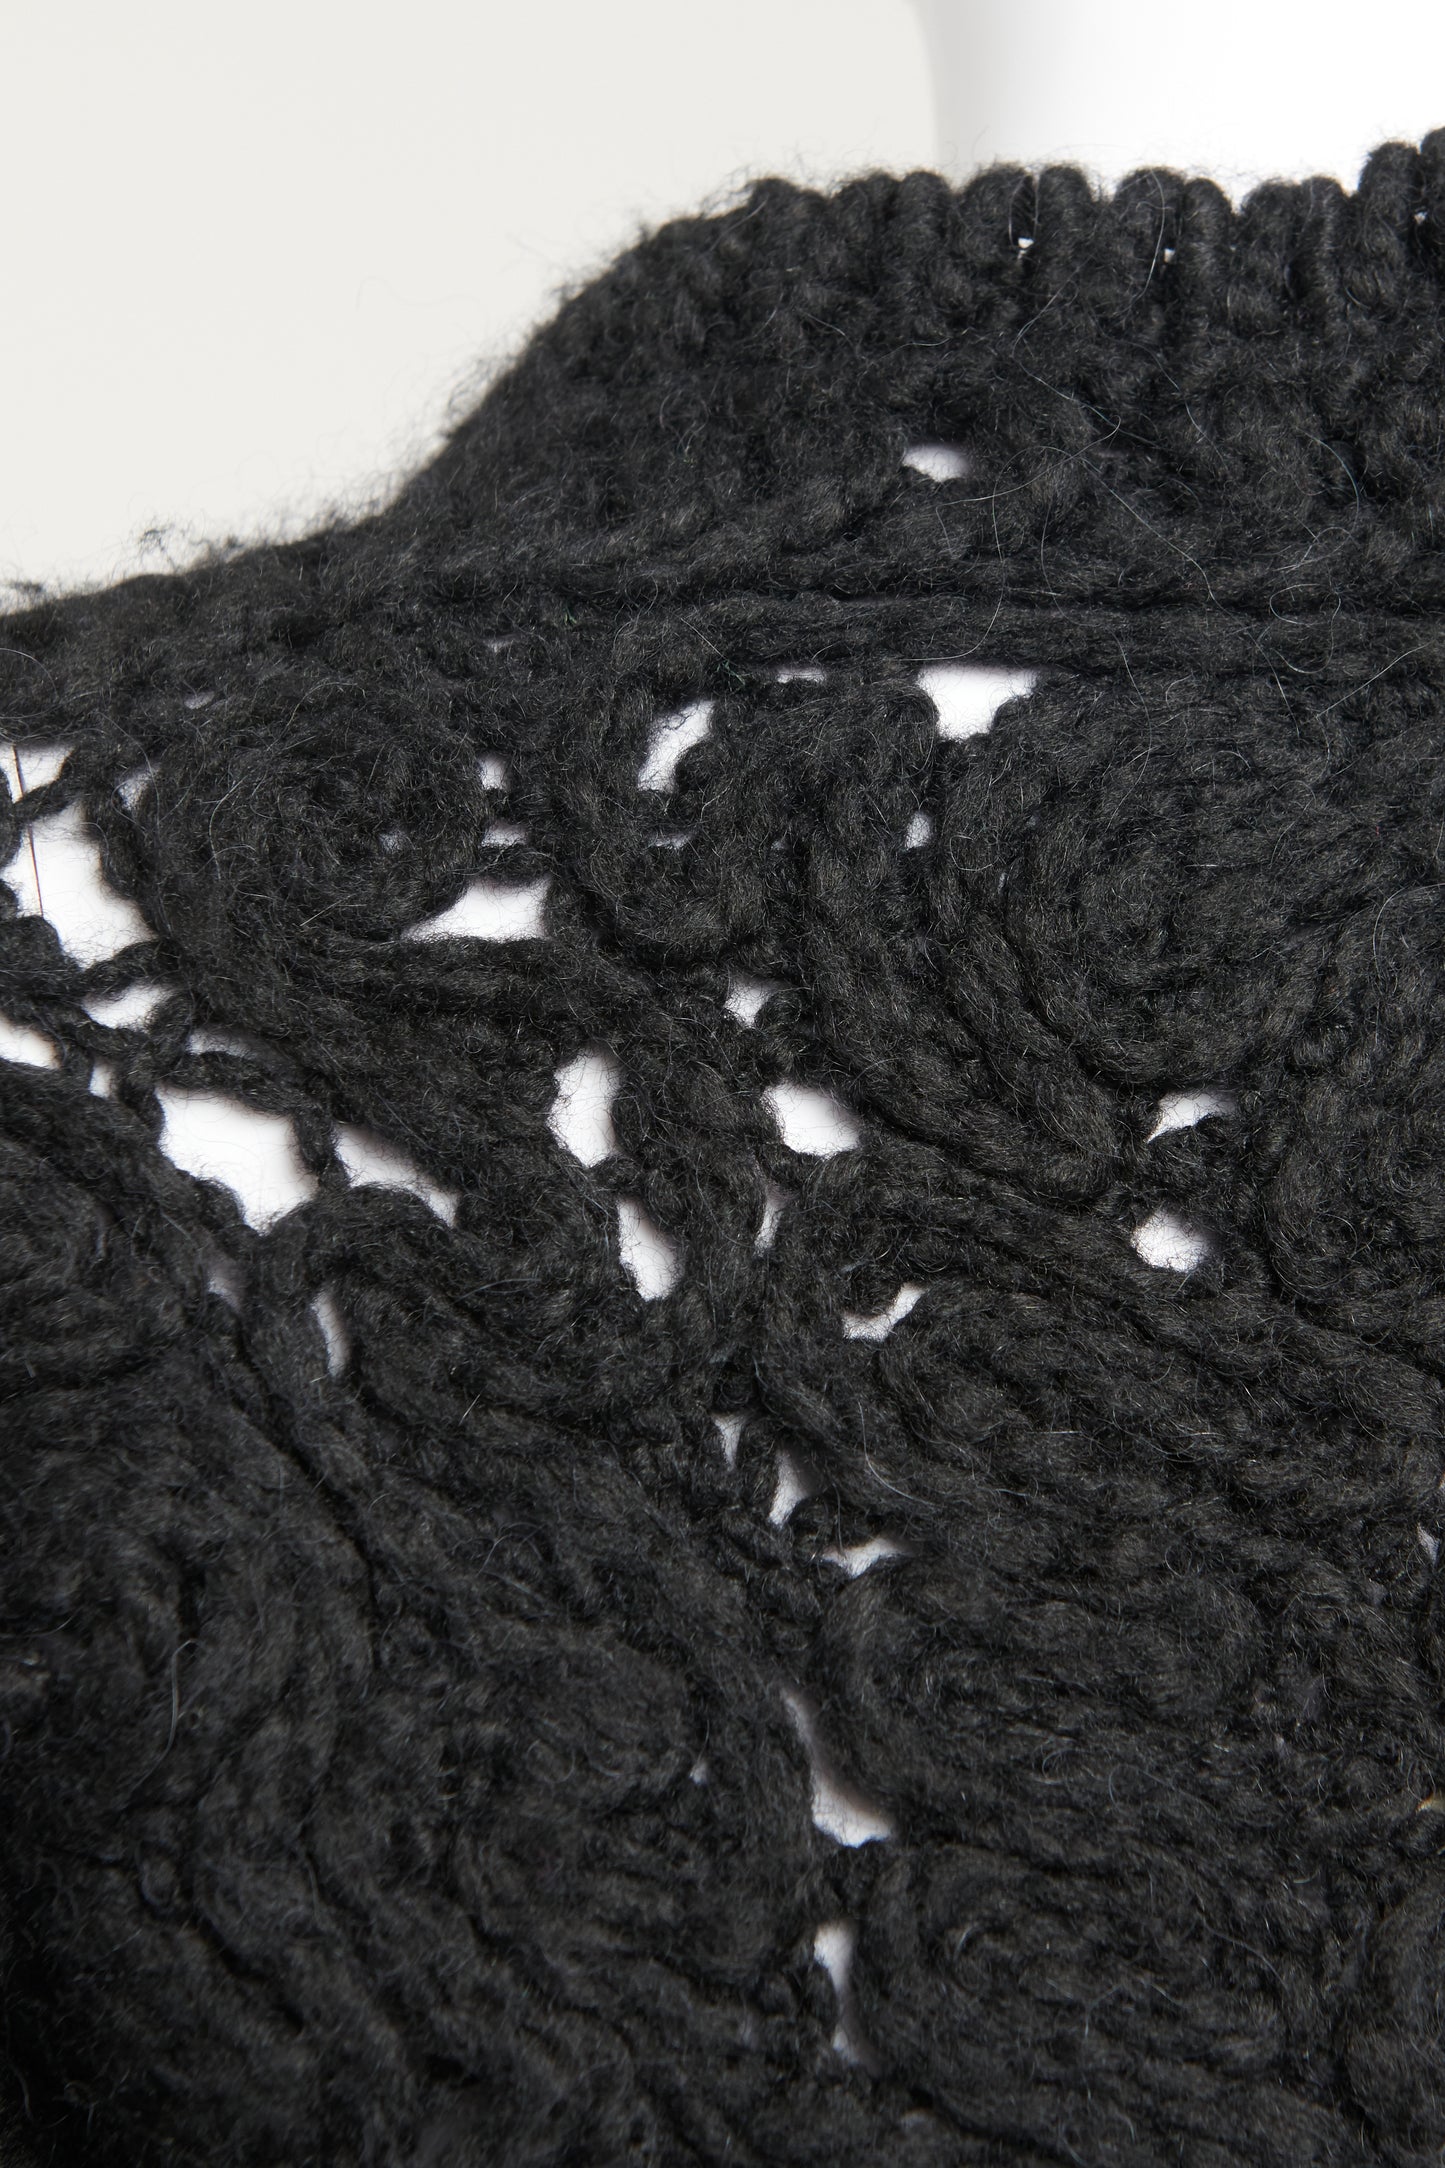 Black Knitted Wool Preowned Dress